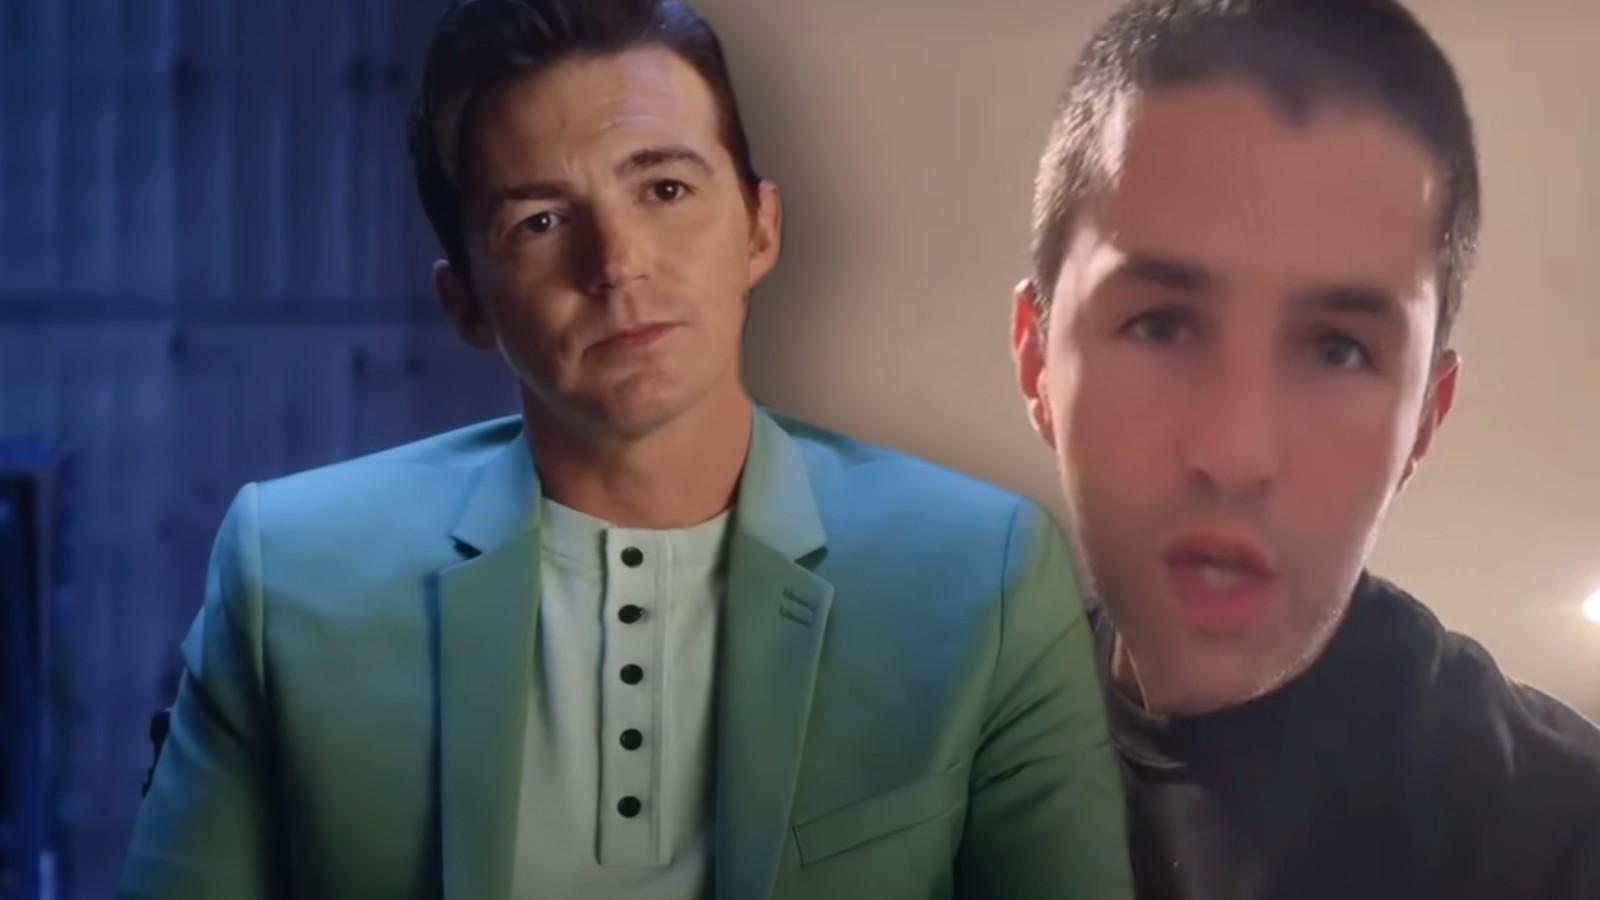 Drake Bell in Quiet on Set and Josh Peck in TikTok video